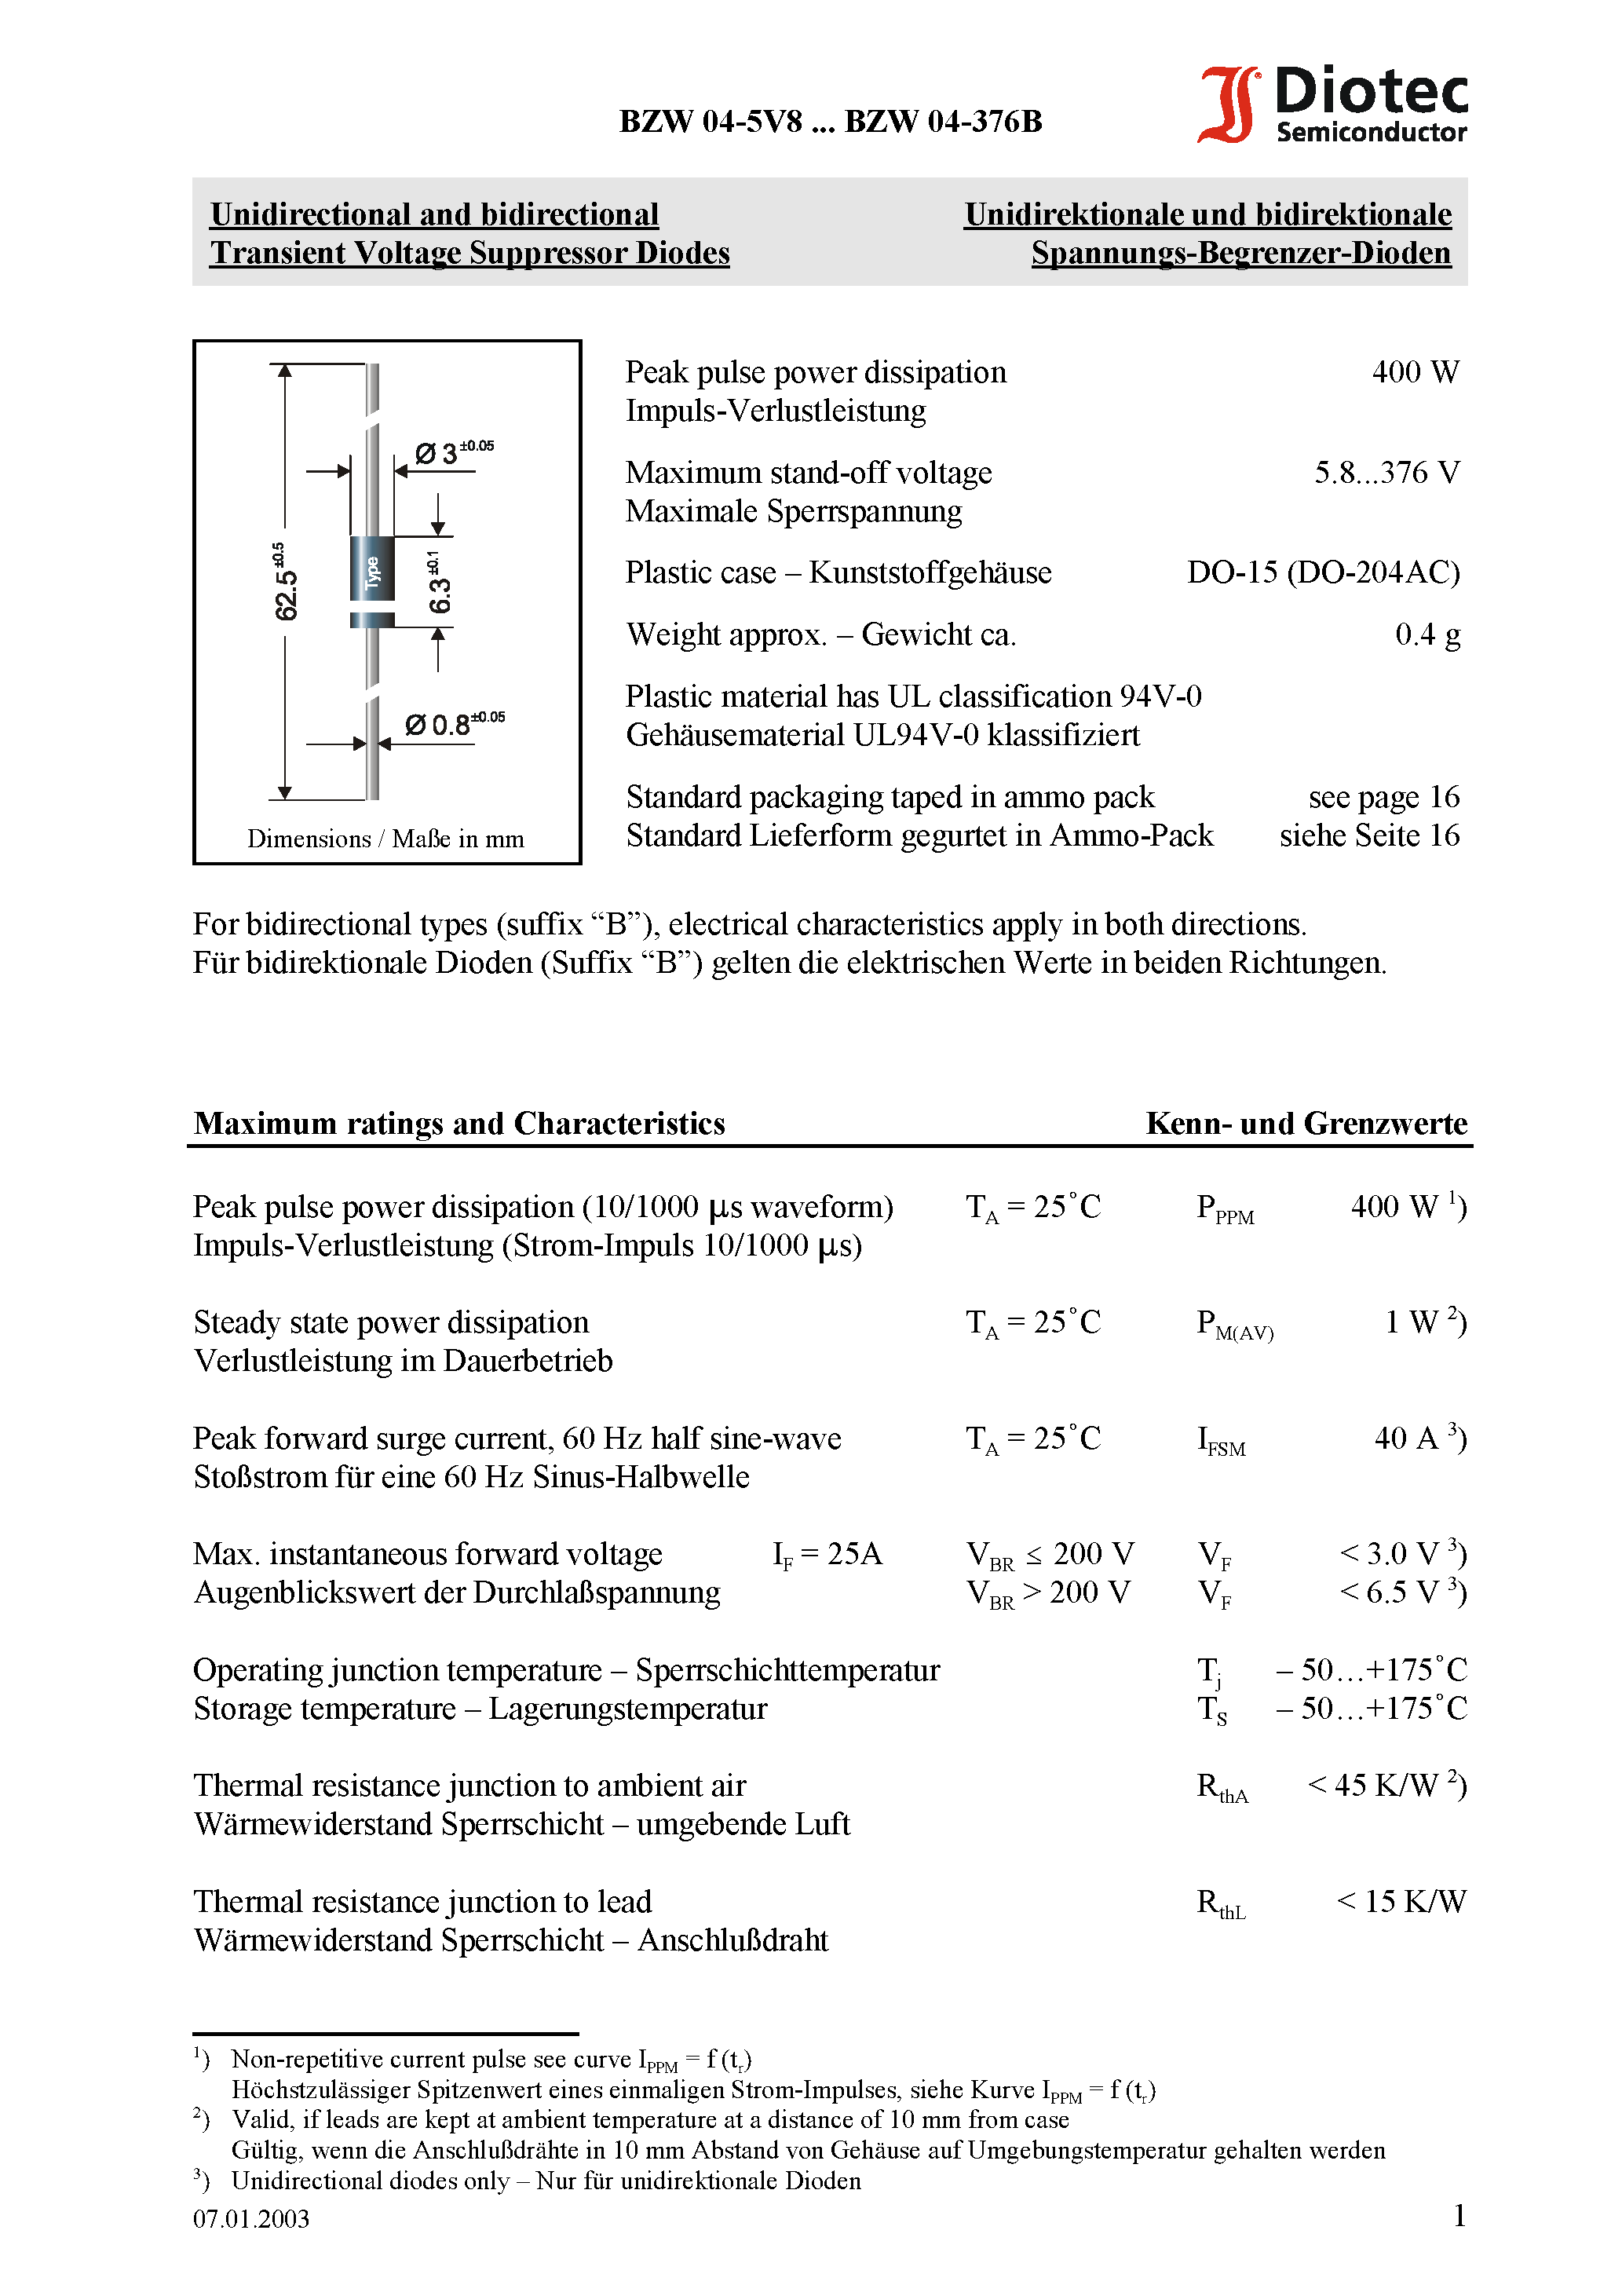 Datasheet BZW04-111 - Unidirectional and bidirectional Transient Voltage Suppressor Diodes page 1